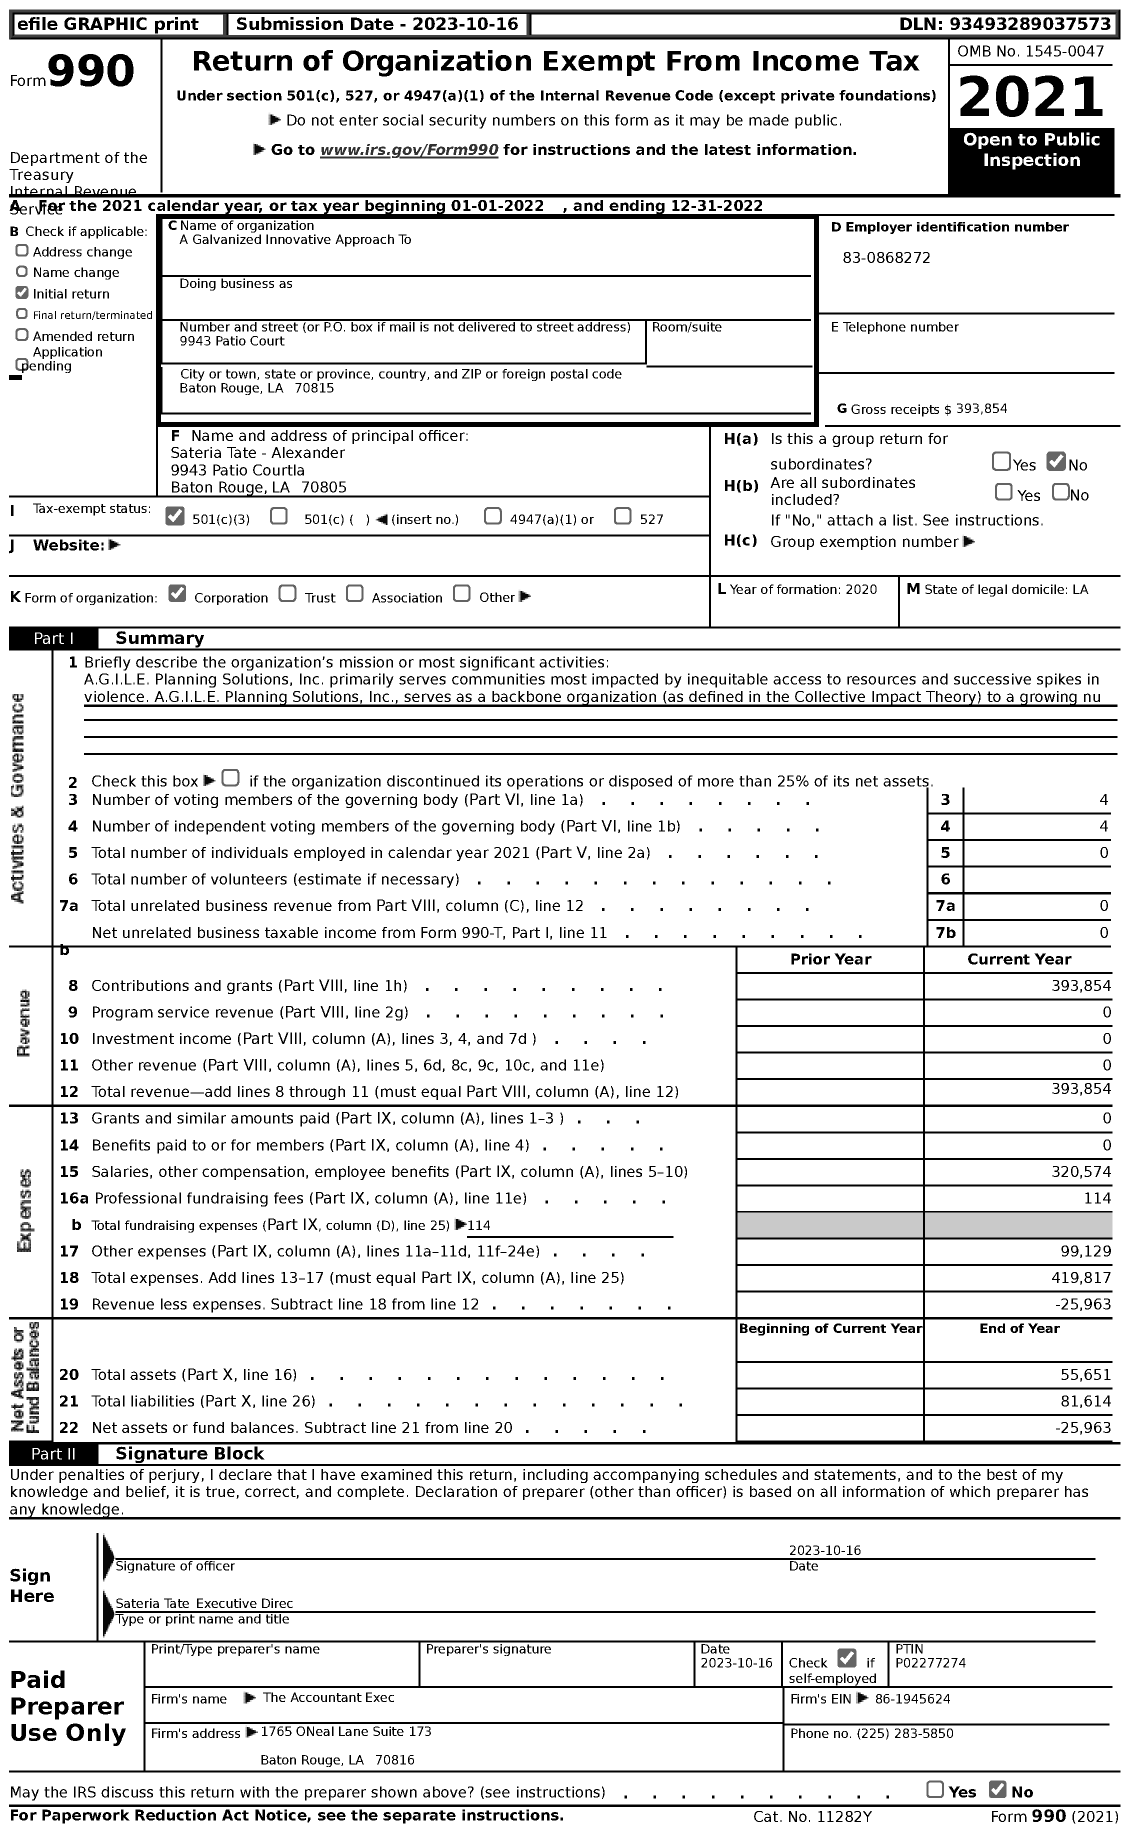 Image of first page of 2022 Form 990 for A Galvanized Innovative Approach To